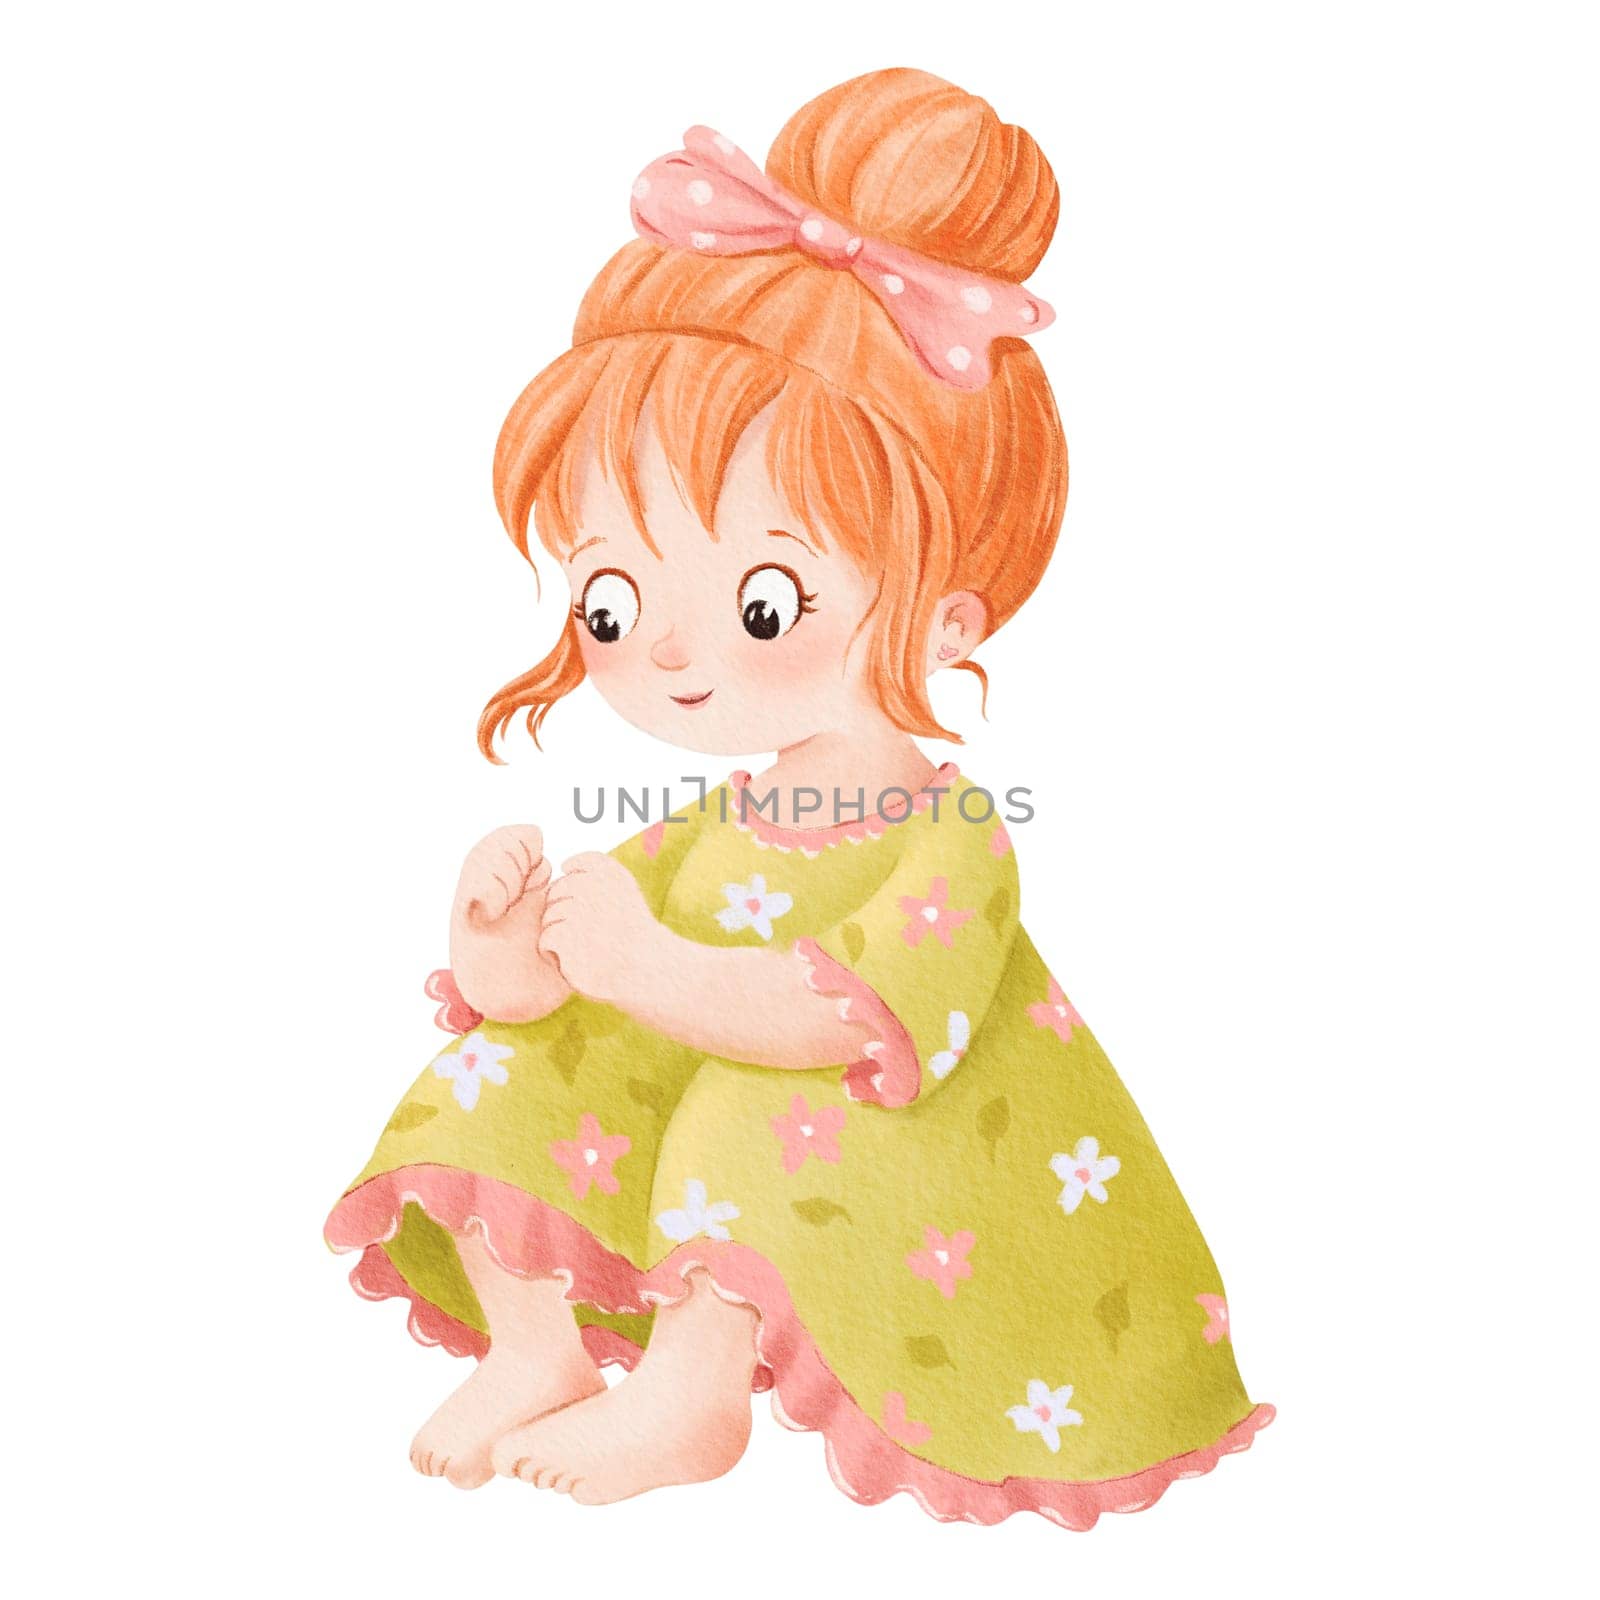 A watercolor children's illustration. a small red-haired girl sitting. She wears a green dress with a flower pattern and a pink bow. for children's books educational materials, or greeting cards by Art_Mari_Ka